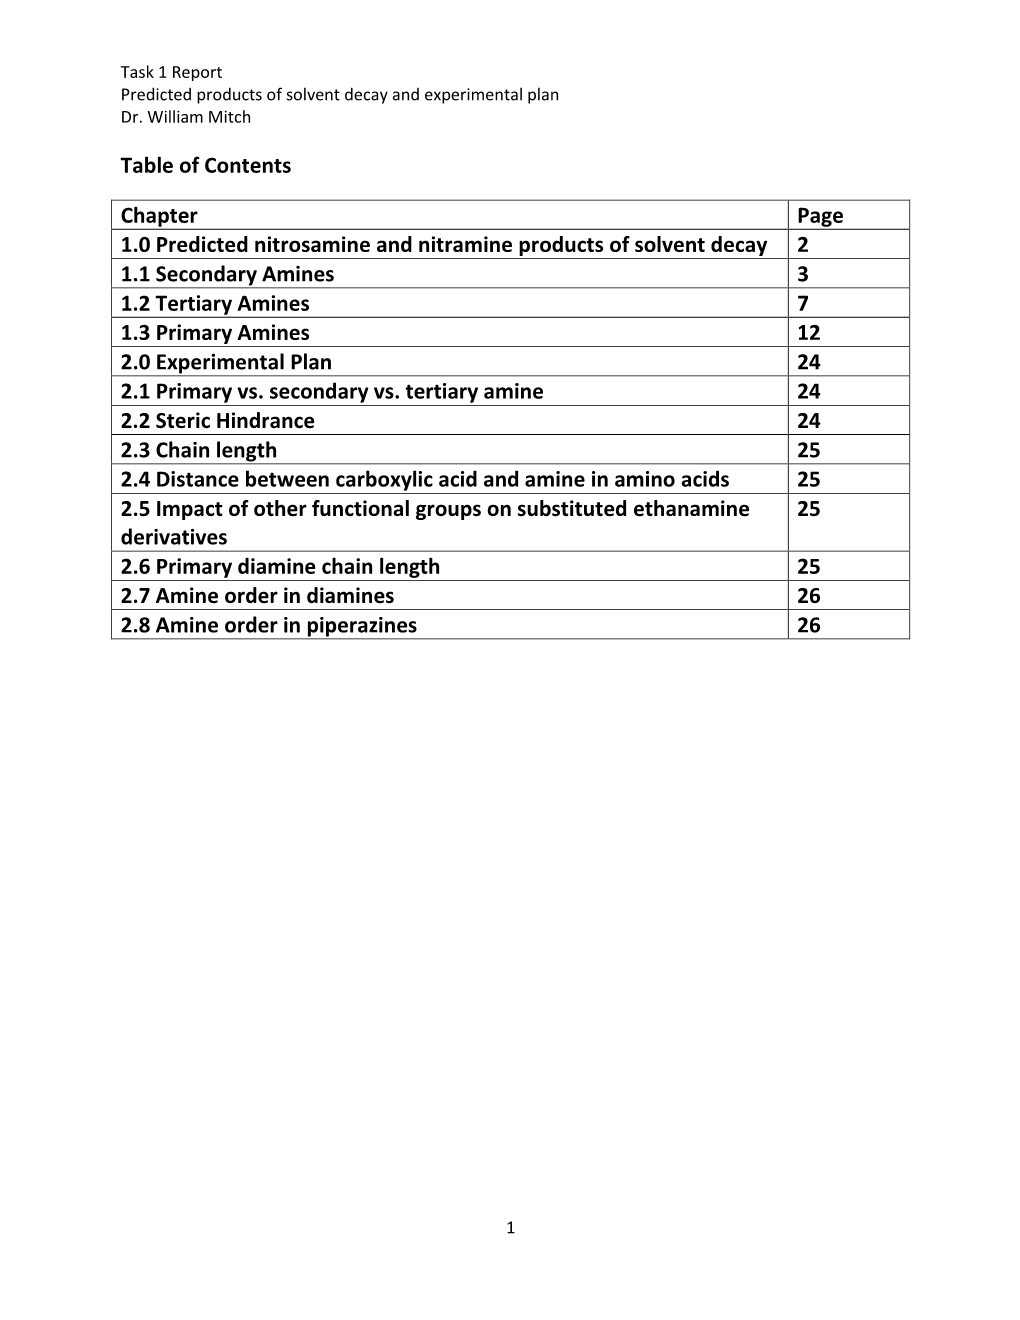 Table of Contents Chapter Page 1.0 Predicted Nitrosamine And